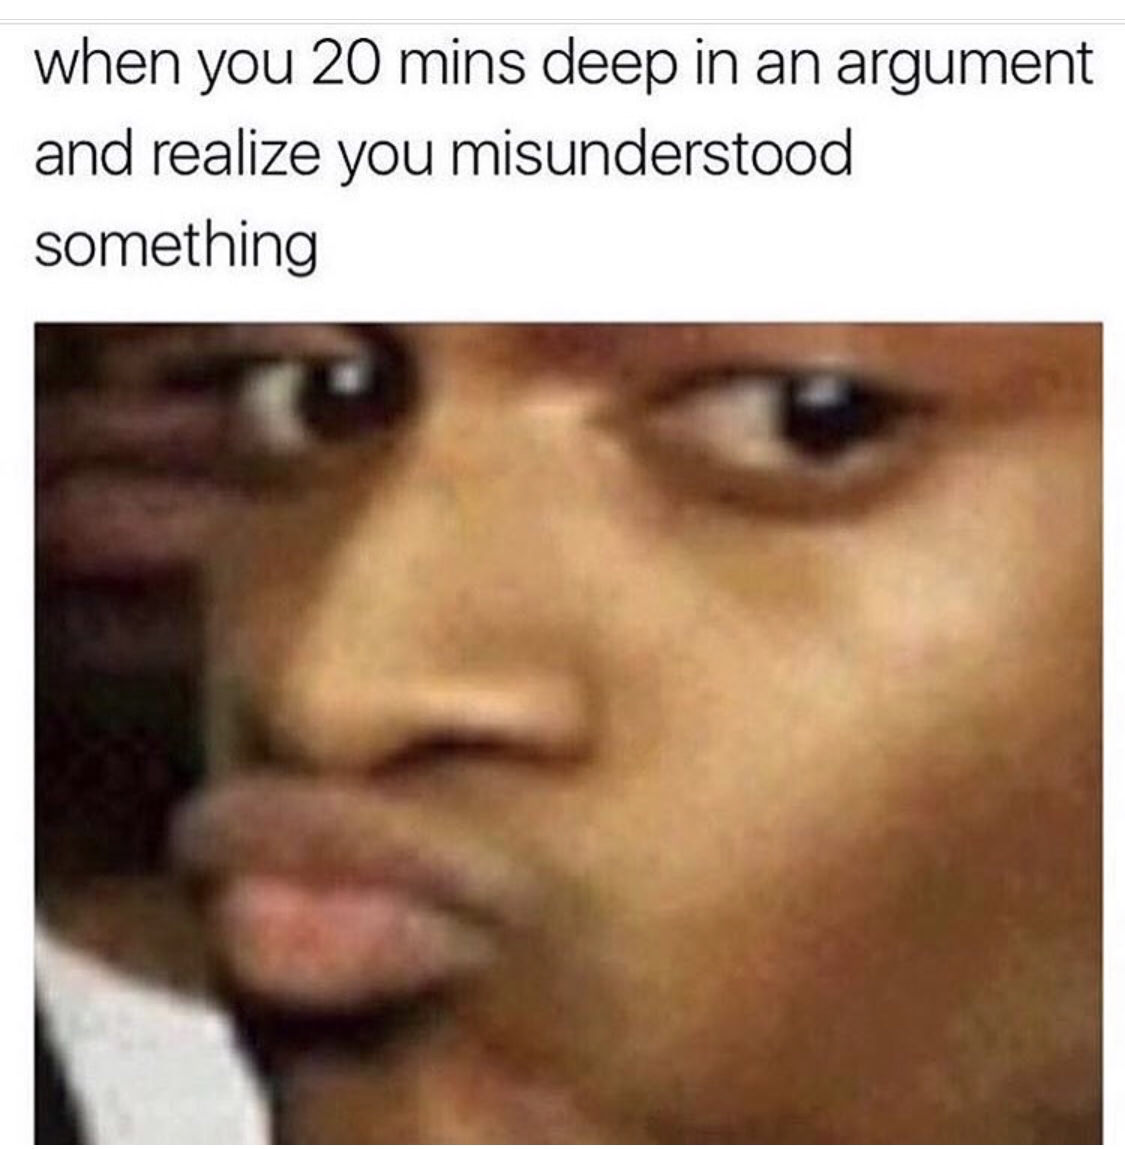 awkward meme - when you 20 mins deep in an argument and realize you misunderstood something